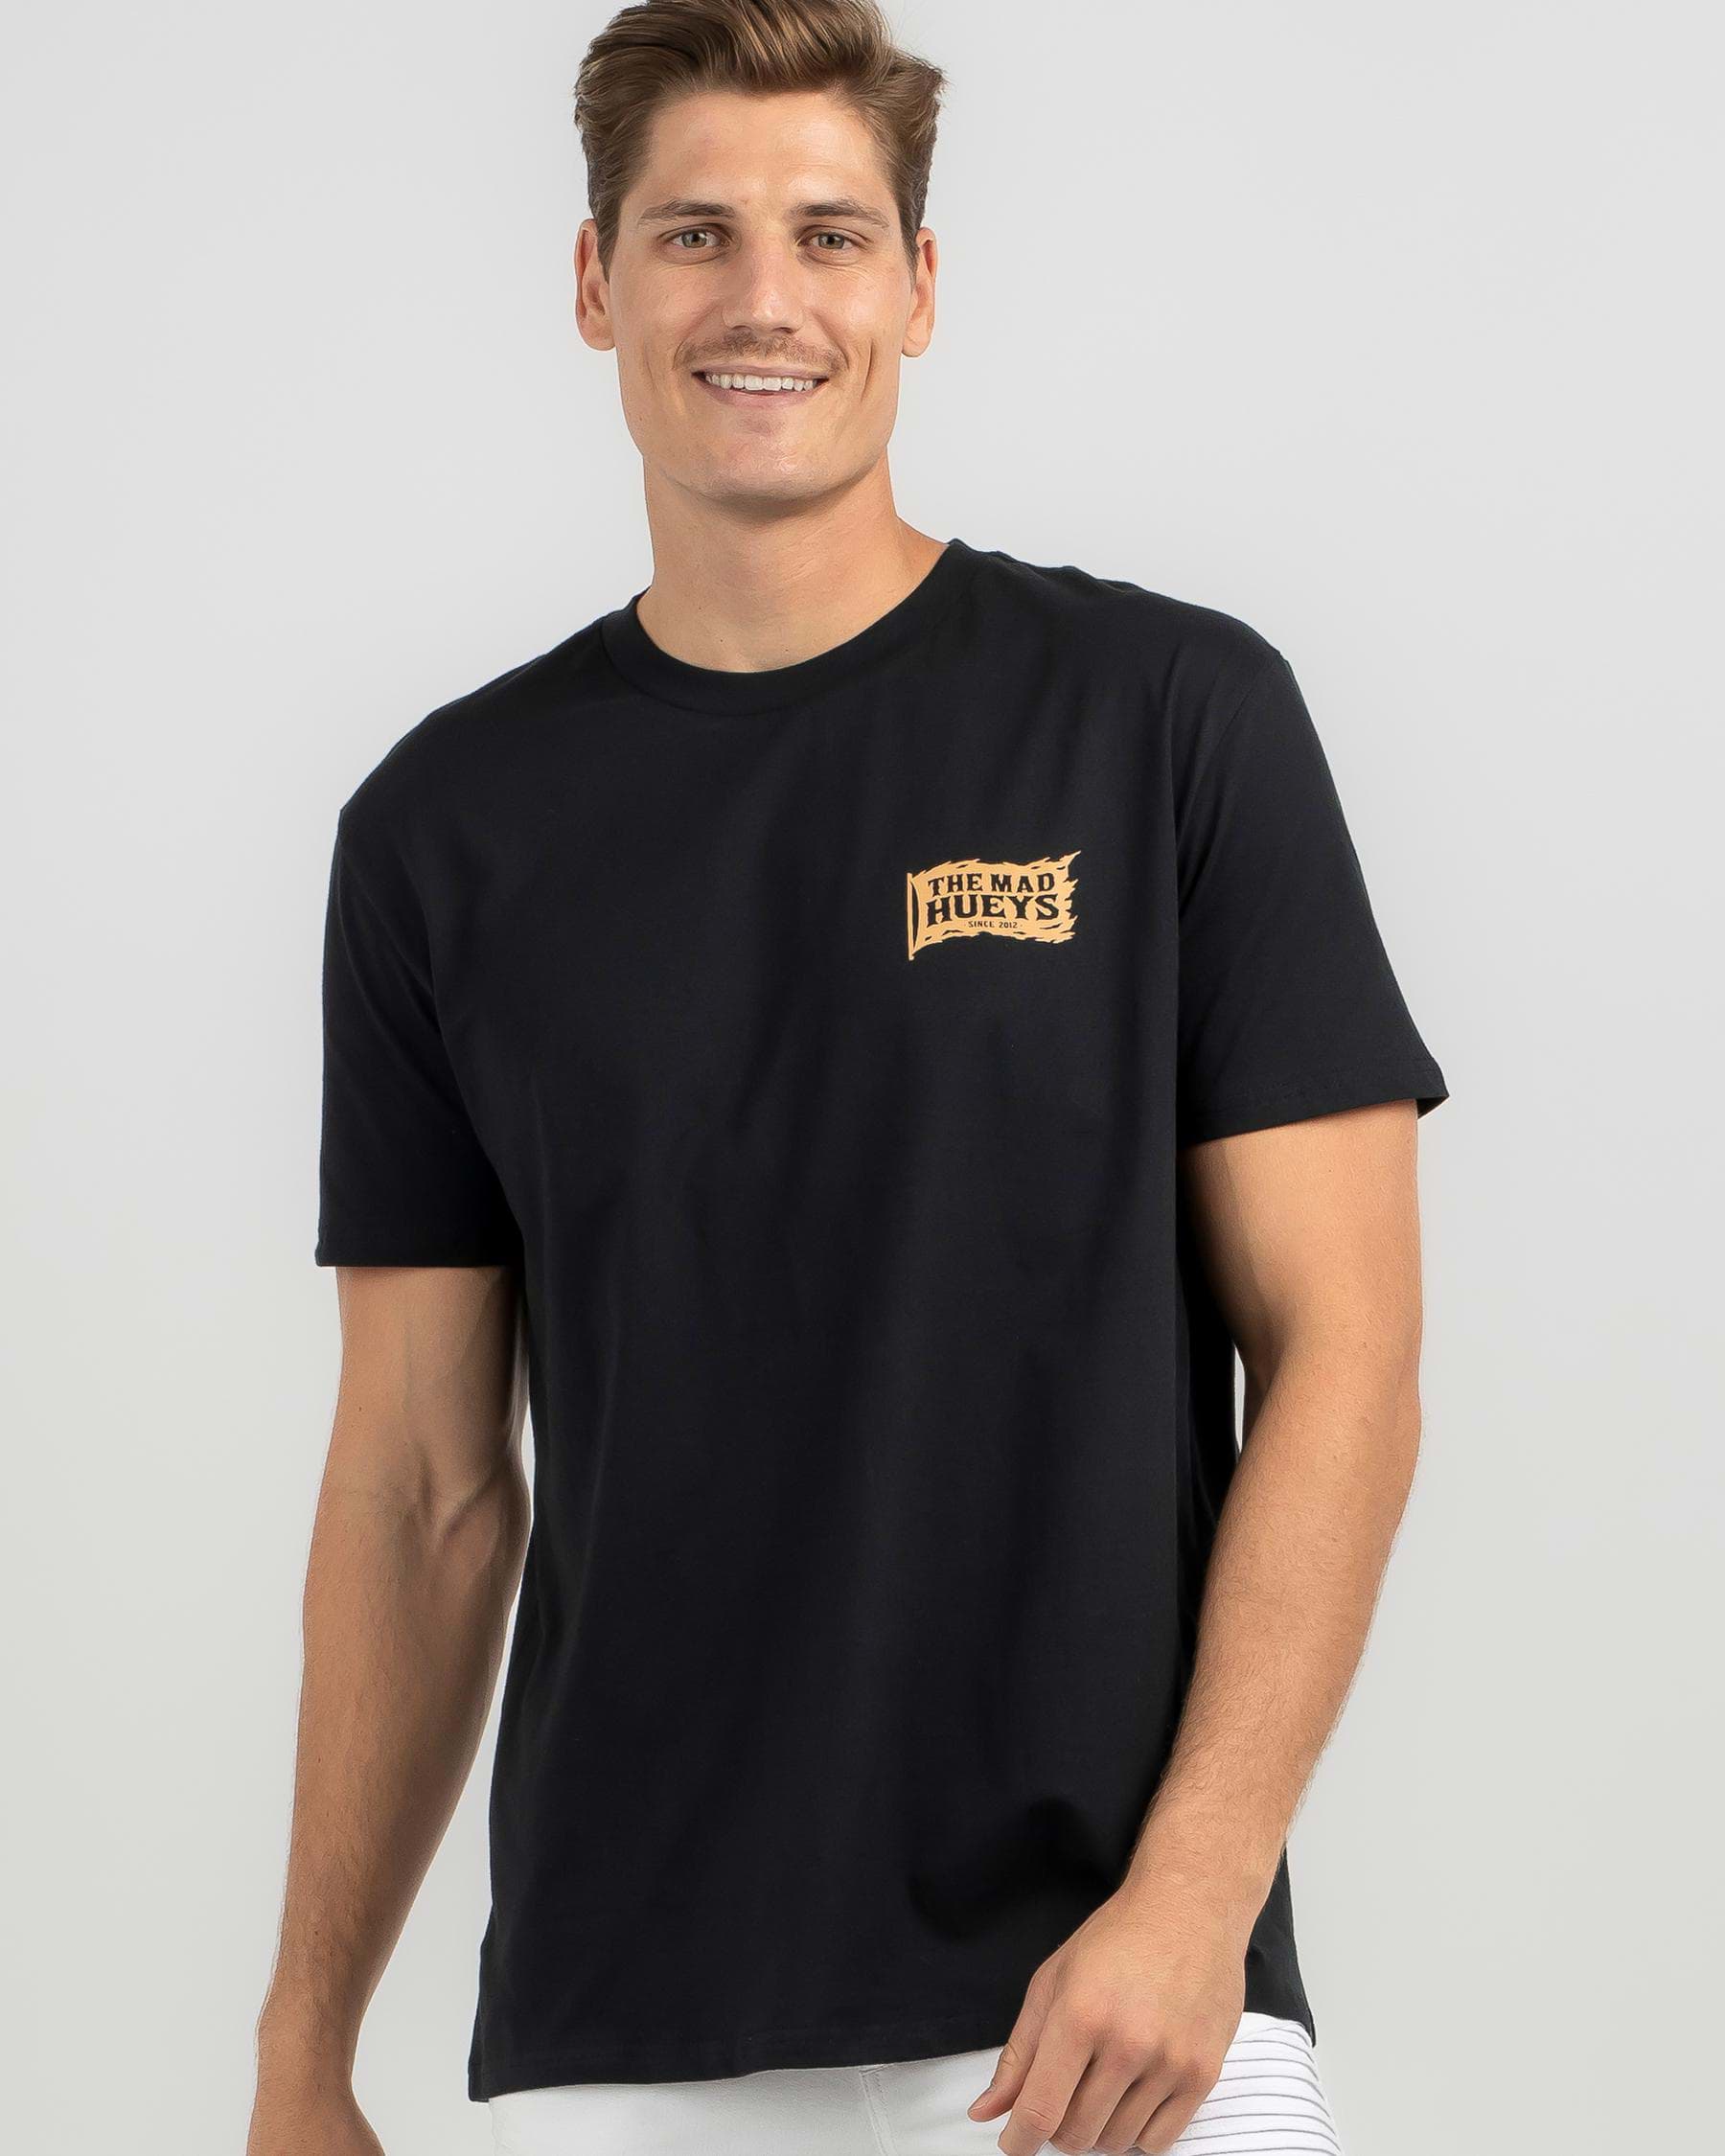 Shop The Mad Hueys Captain Cooked T-Shirt In Black - Fast Shipping ...